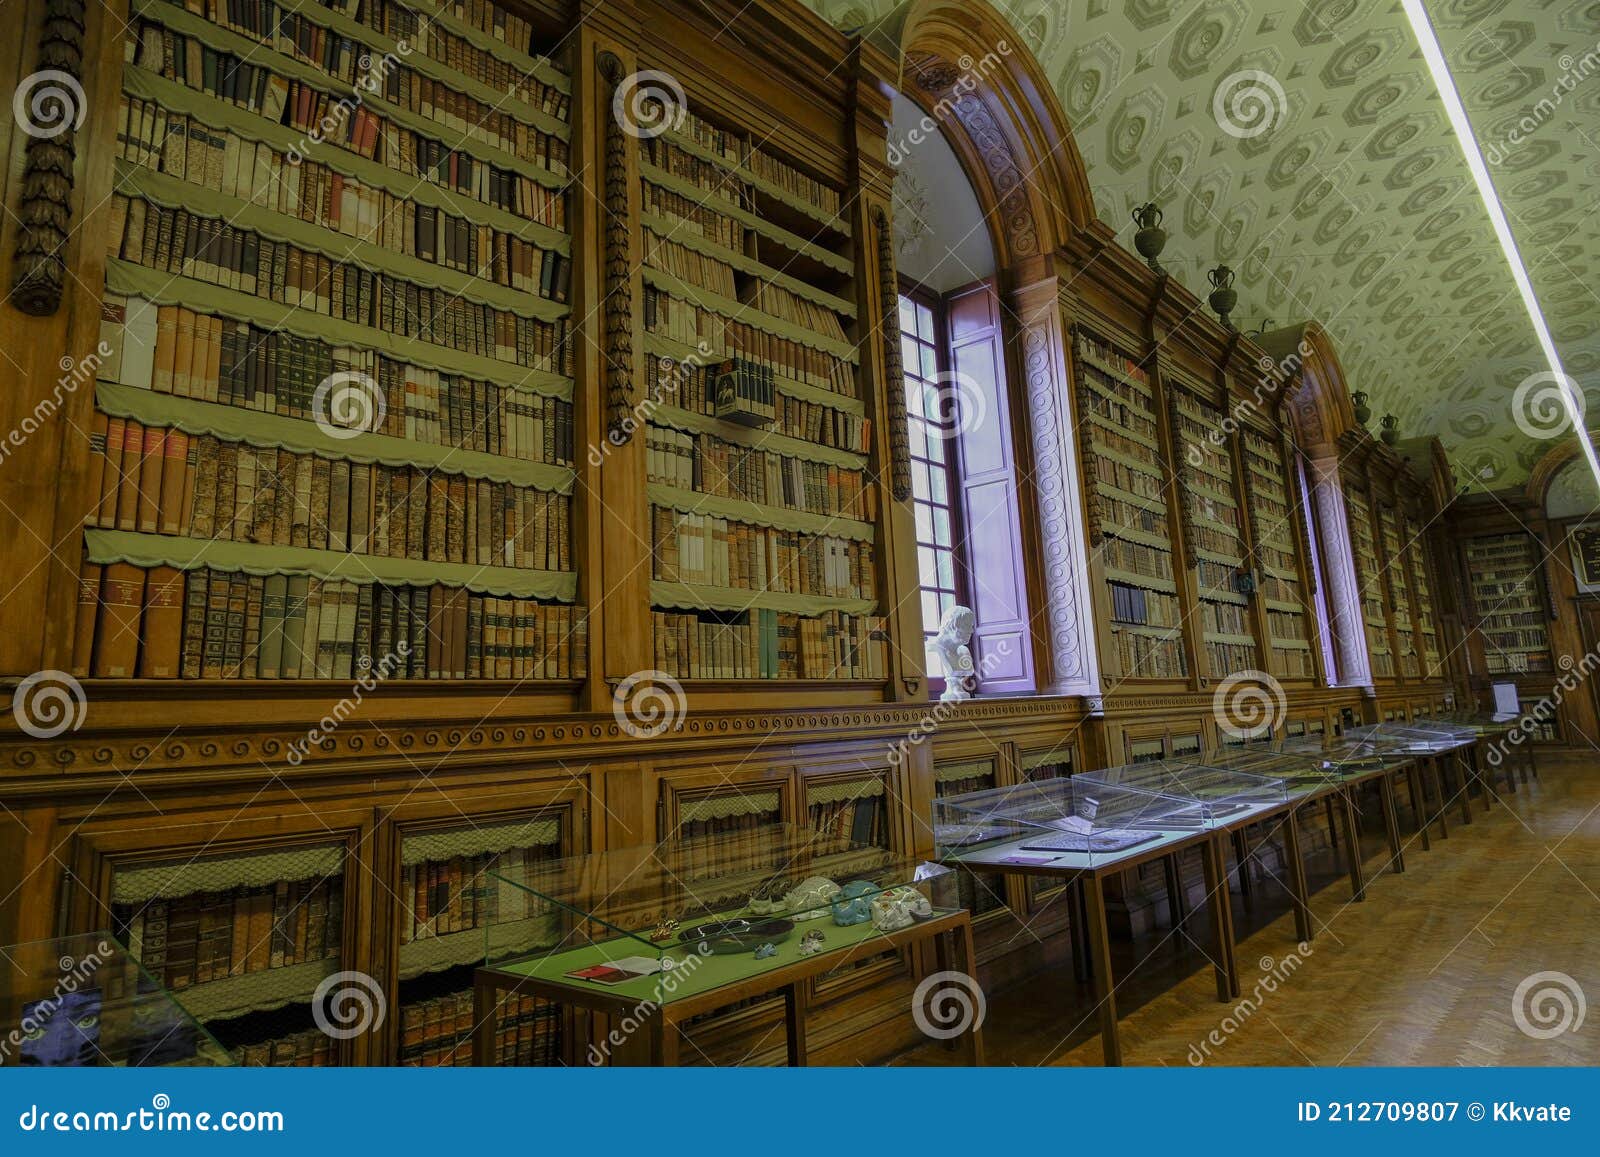 shape Sinis Motley February 2021 Parma, Italy: Interior, Stairs, Shelves Full of Ancient Books  of the Biblioteca Palantina, Library in Palazzo Della Editorial Photography  - Image of arch, palace: 212709807